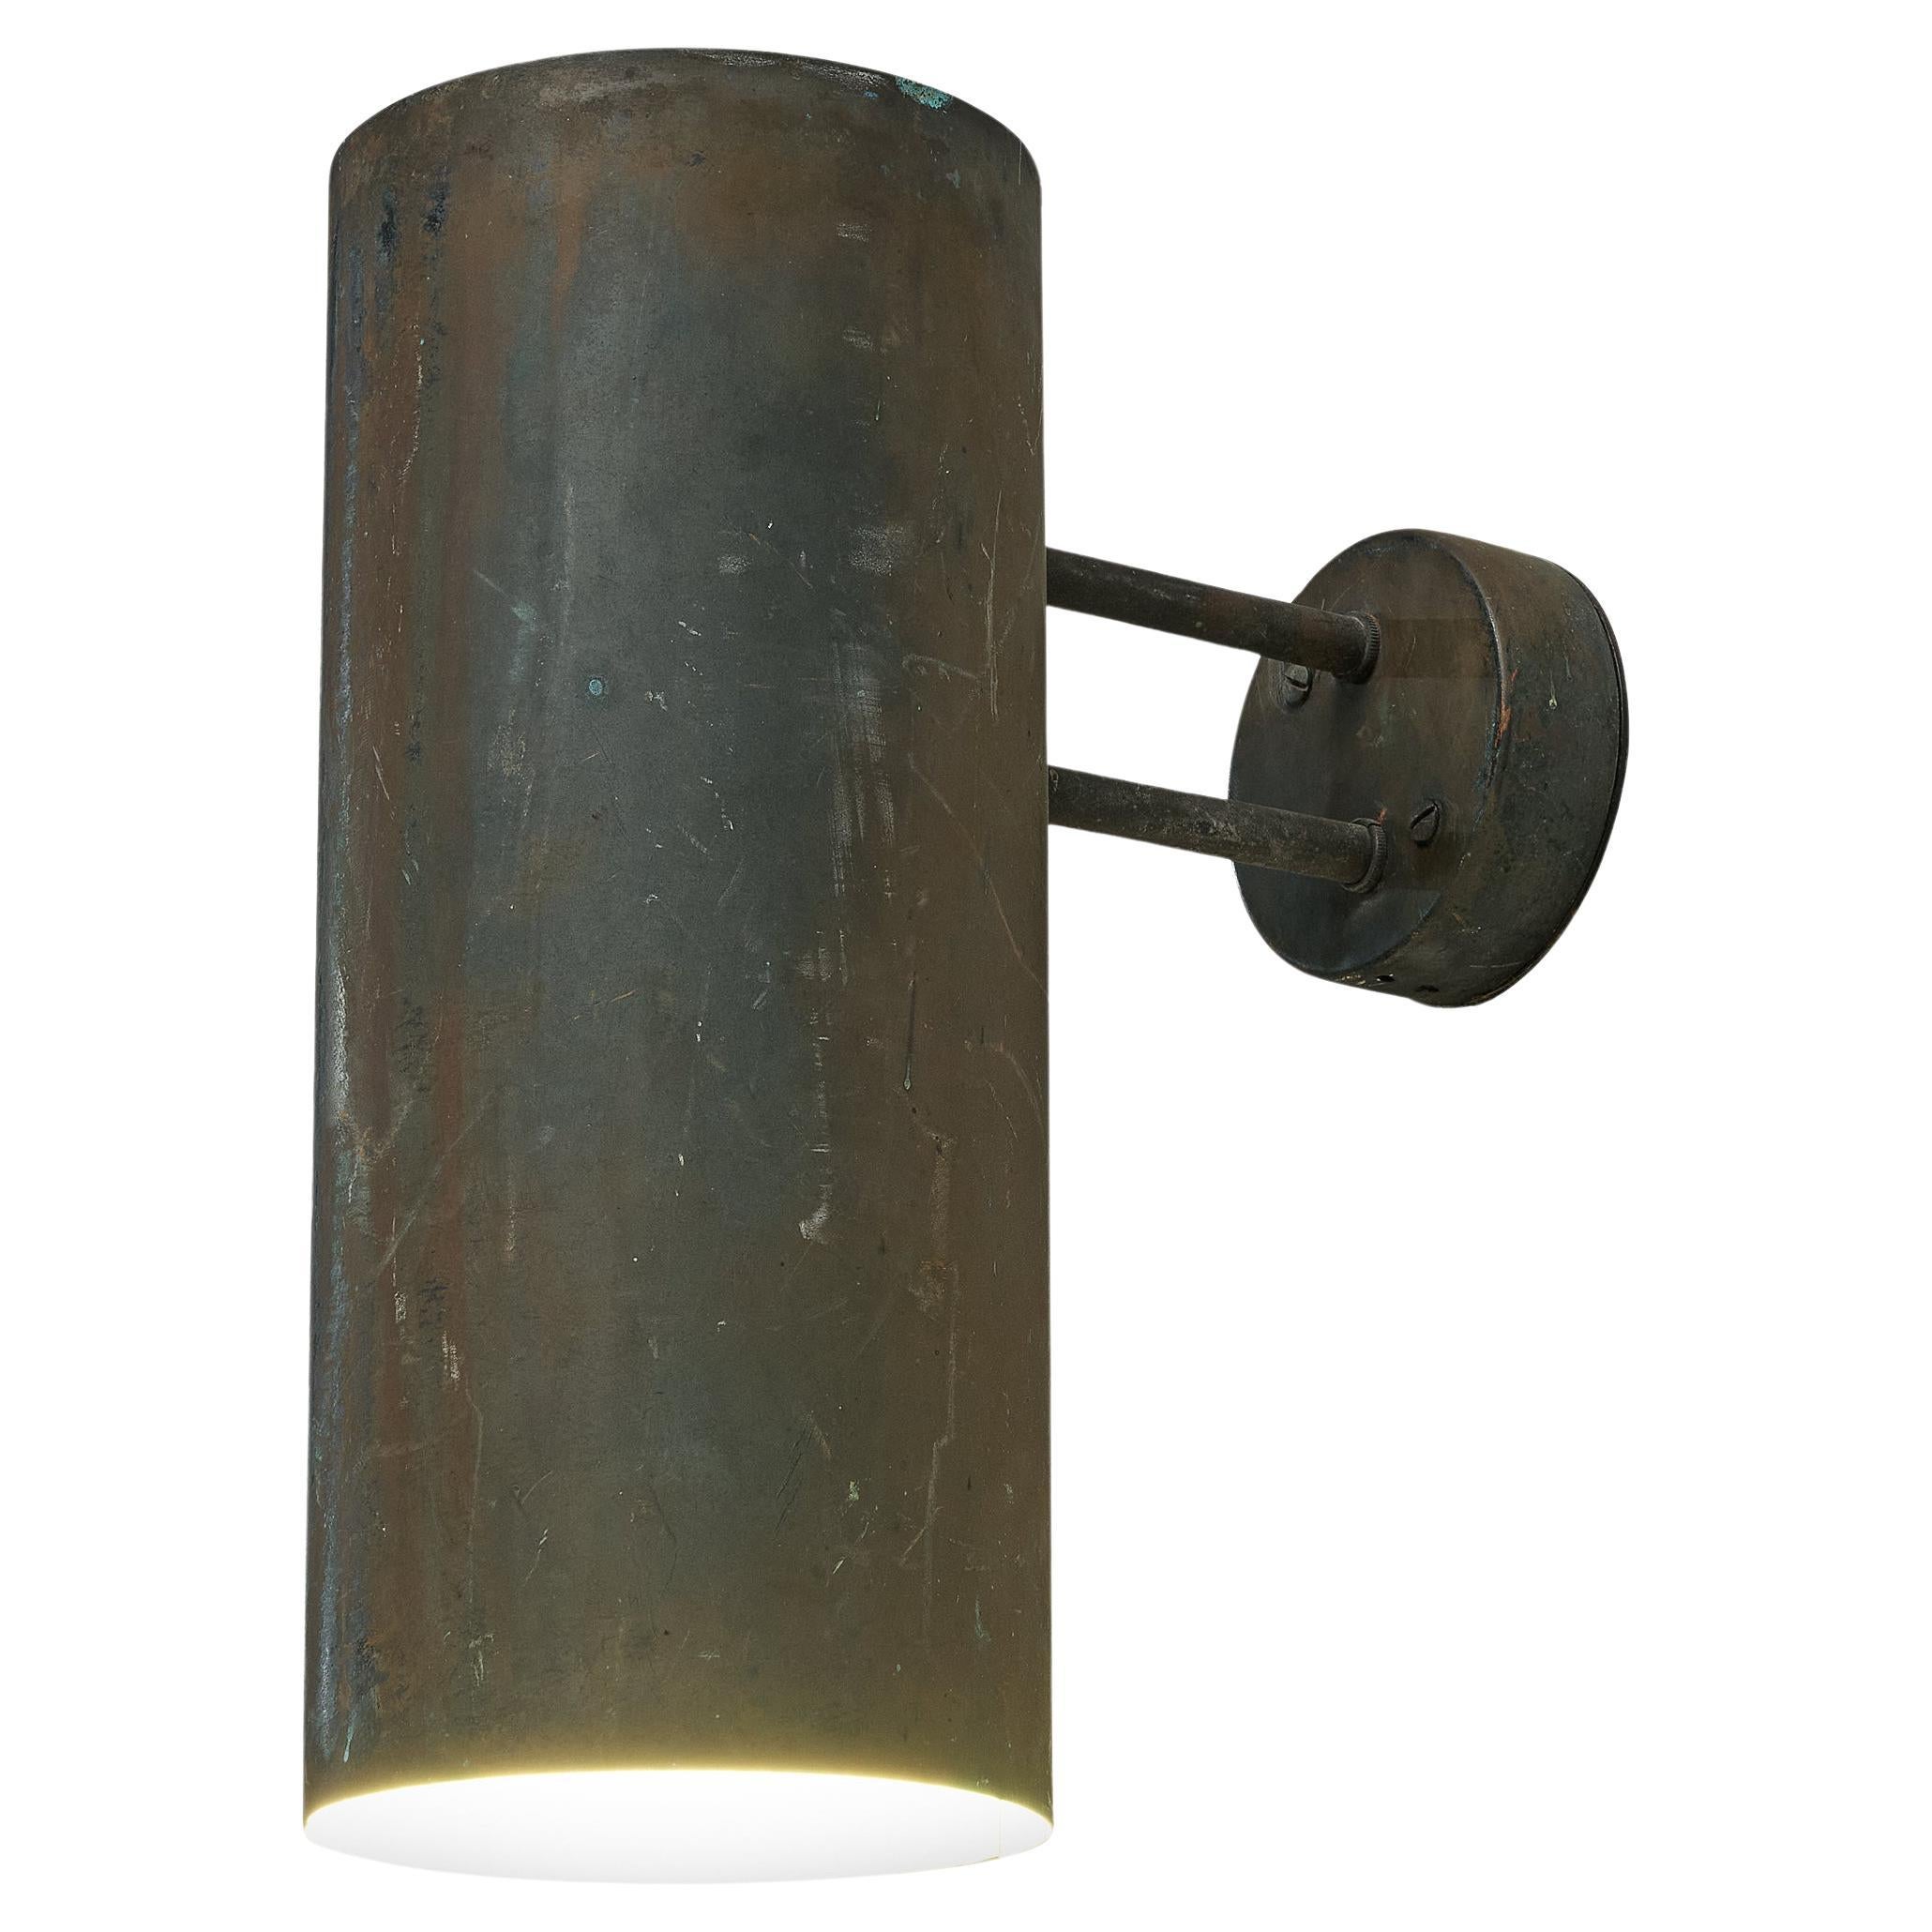 Private listing for Stephanie: Hans-Agne Jakobsson ‘Rulle’ Wall Light (1x) 